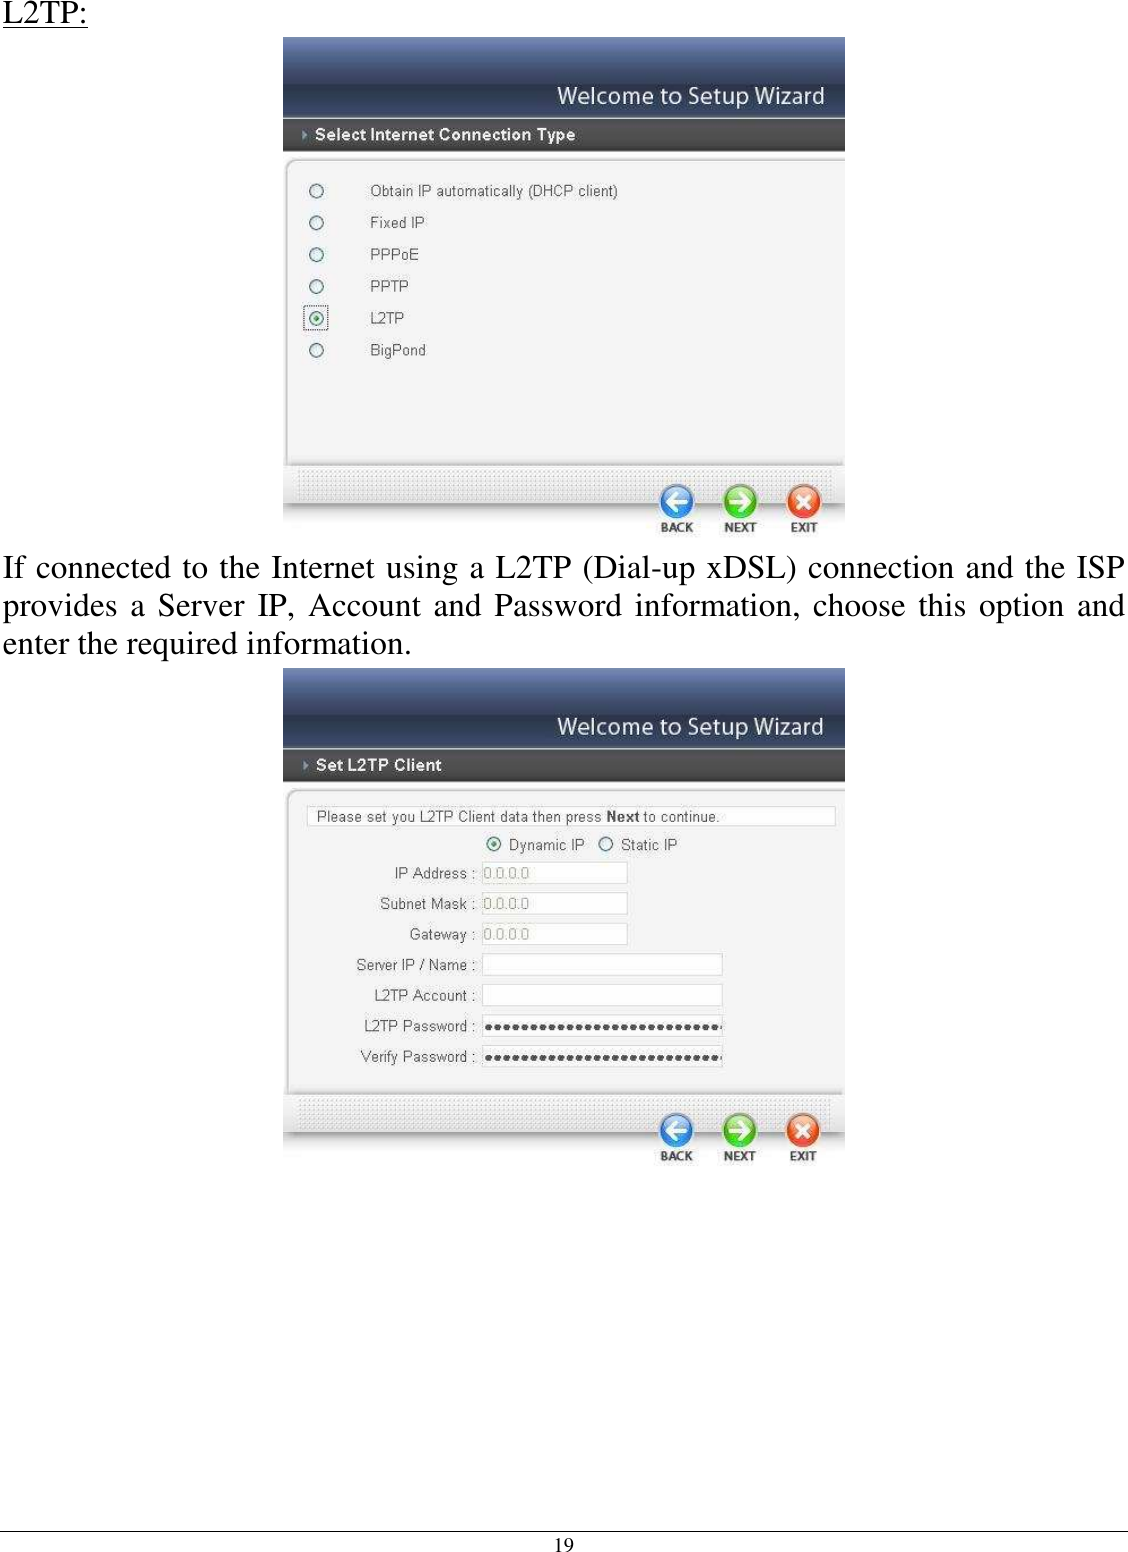 19 L2TP:  If connected to the Internet using a L2TP (Dial-up xDSL) connection and the ISP provides a Server IP, Account and Password information, choose this option and enter the required information.  